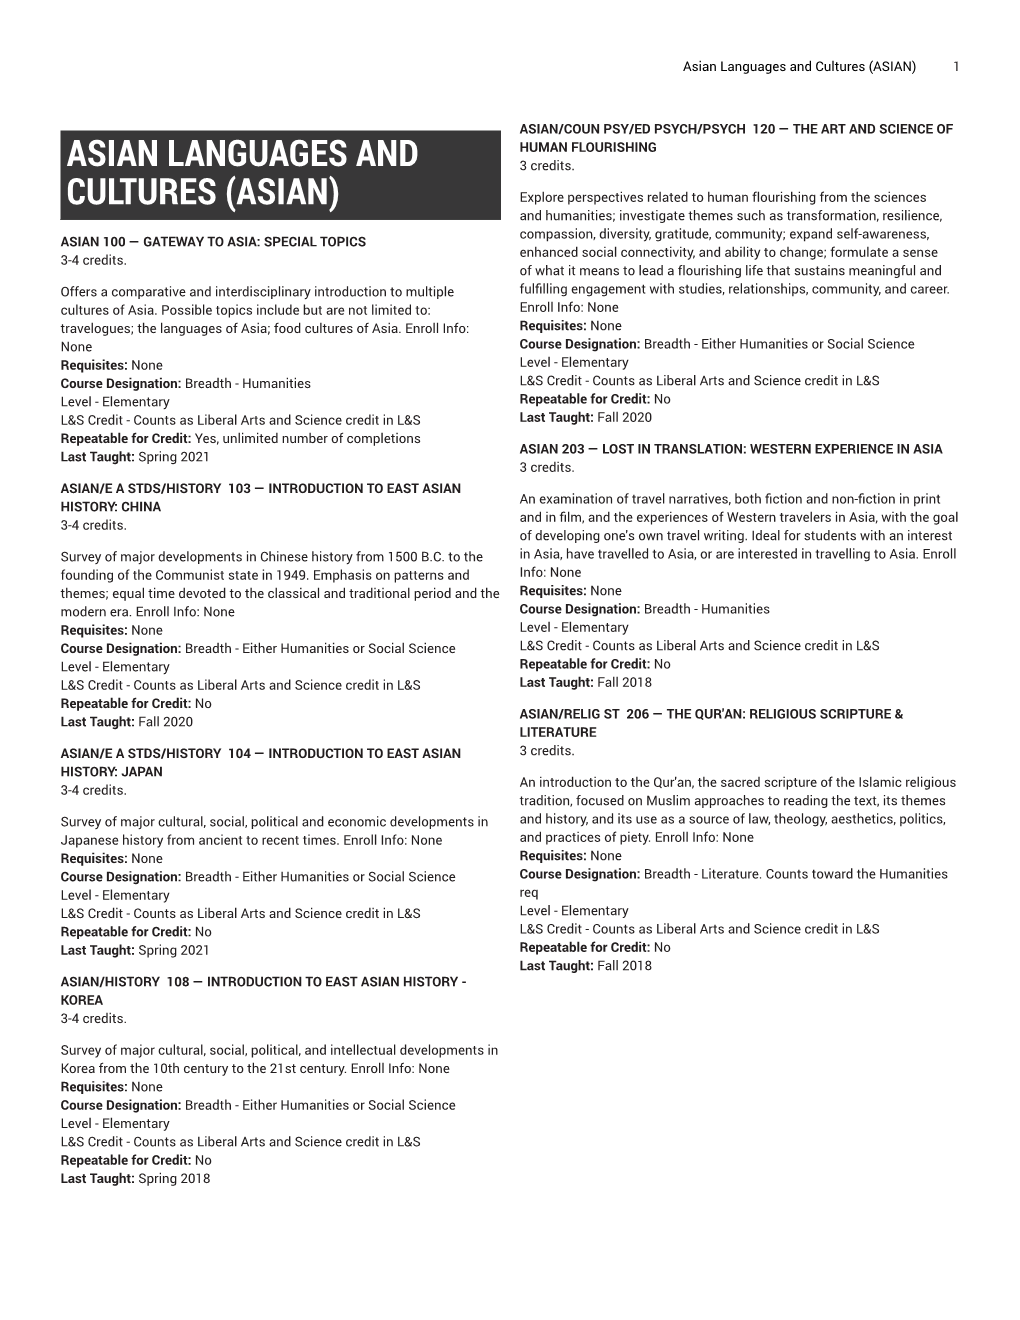 Asian Languages and Cultures (ASIAN) 1